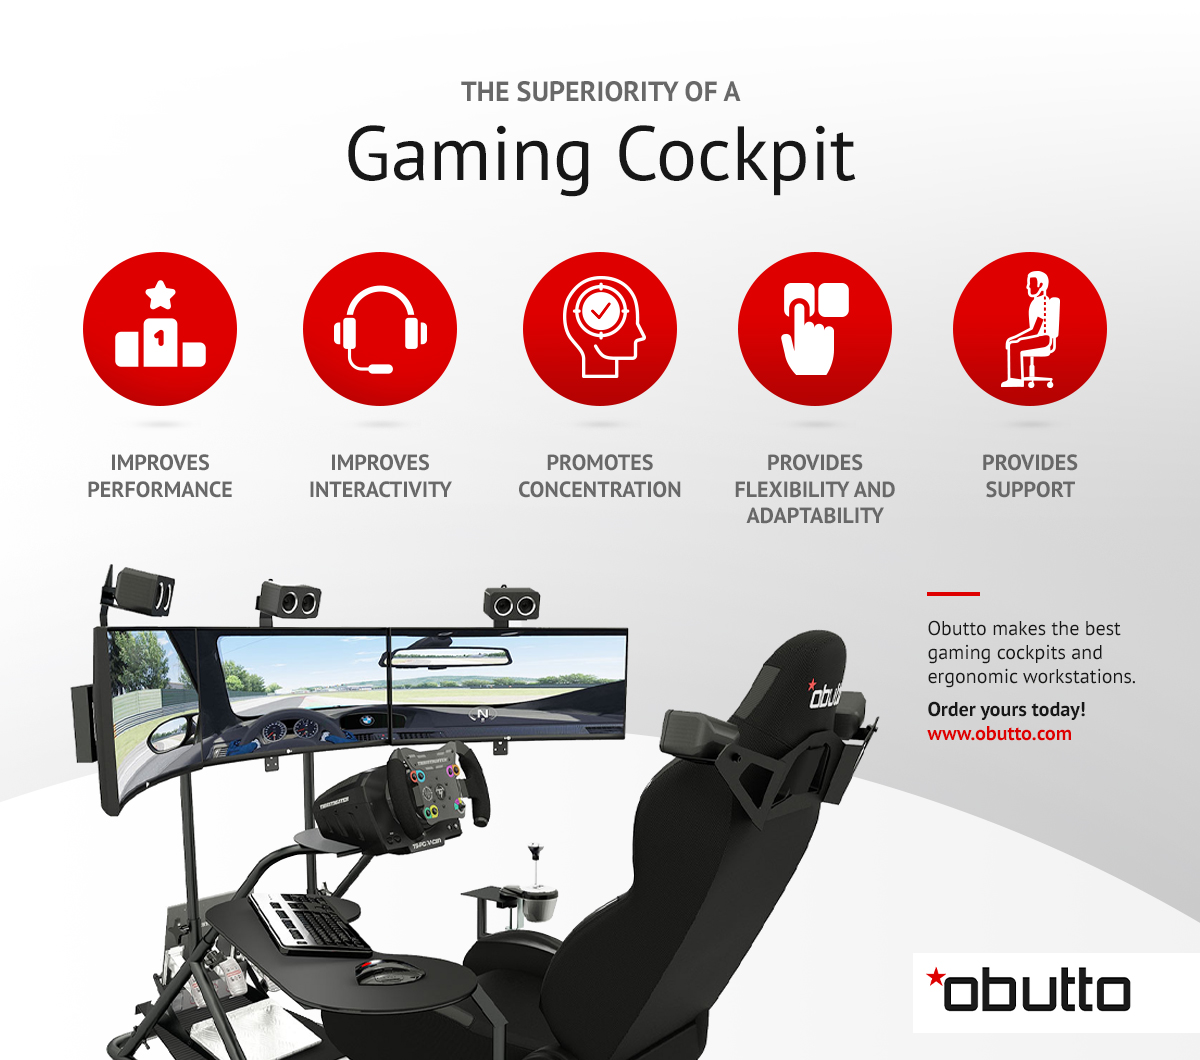 The Superiority of a Gaming Cockpit infographic